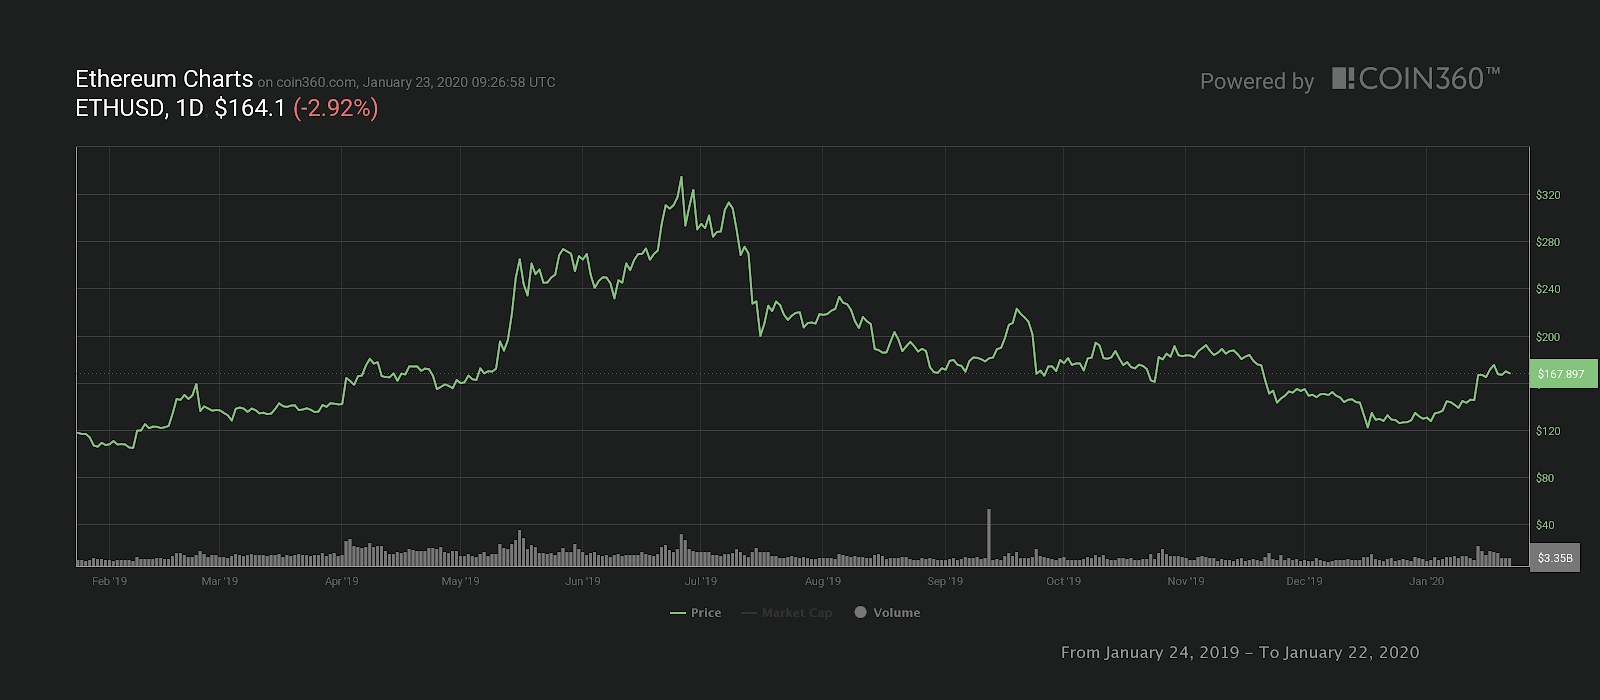 One-year Ether price chart